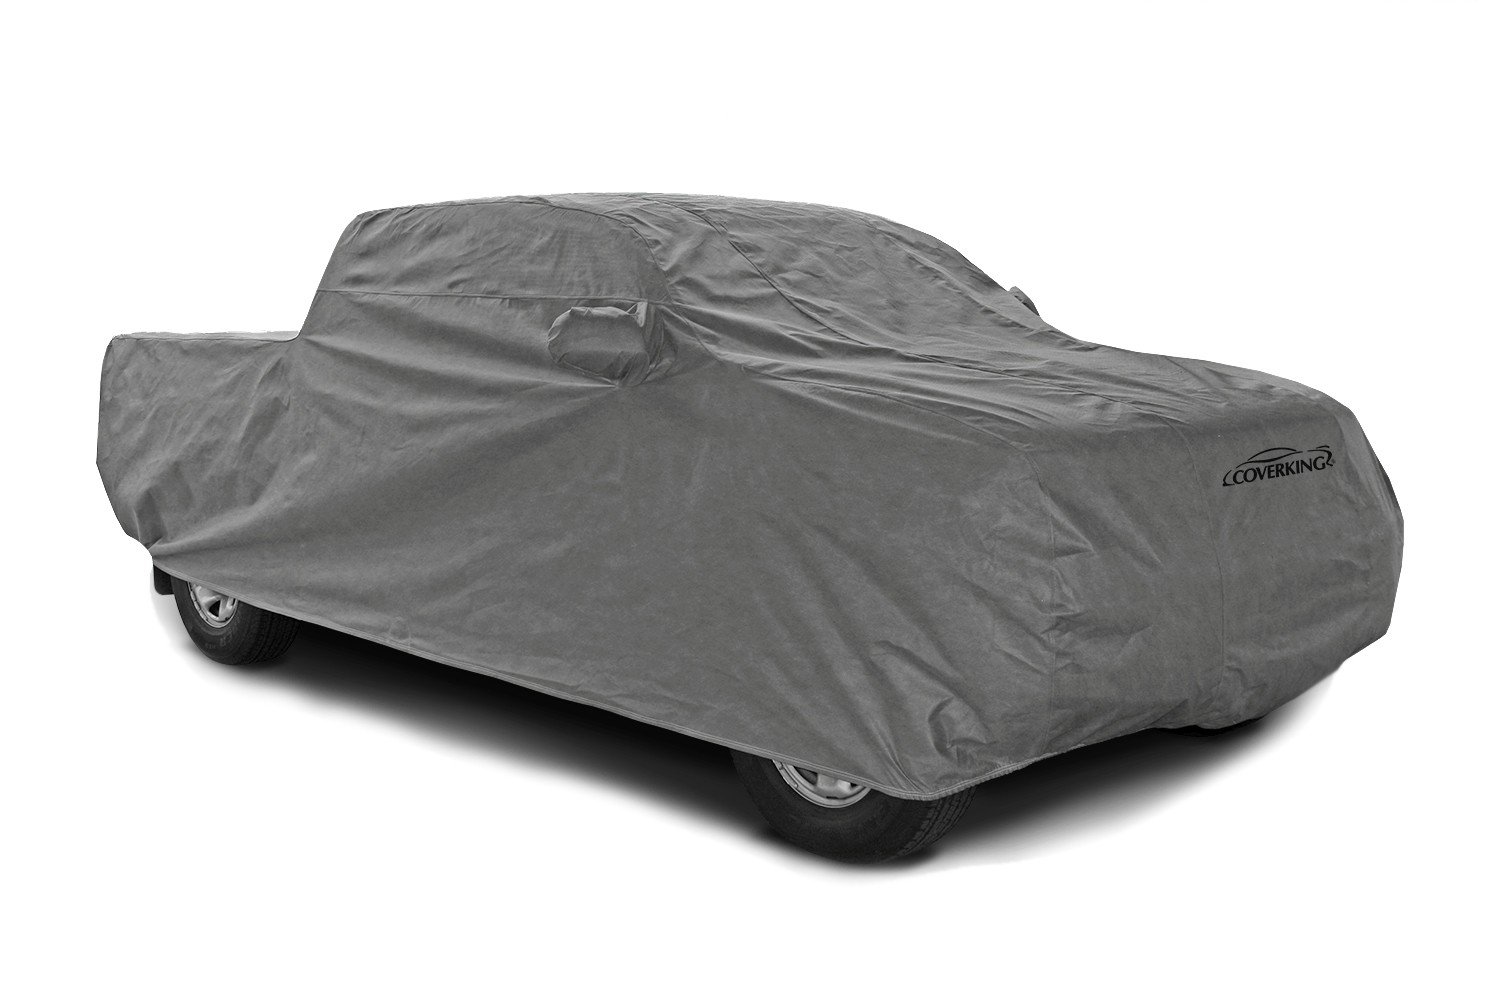 C5 Corvette CoverKing Coverbond Moderate Weather Car Cover 